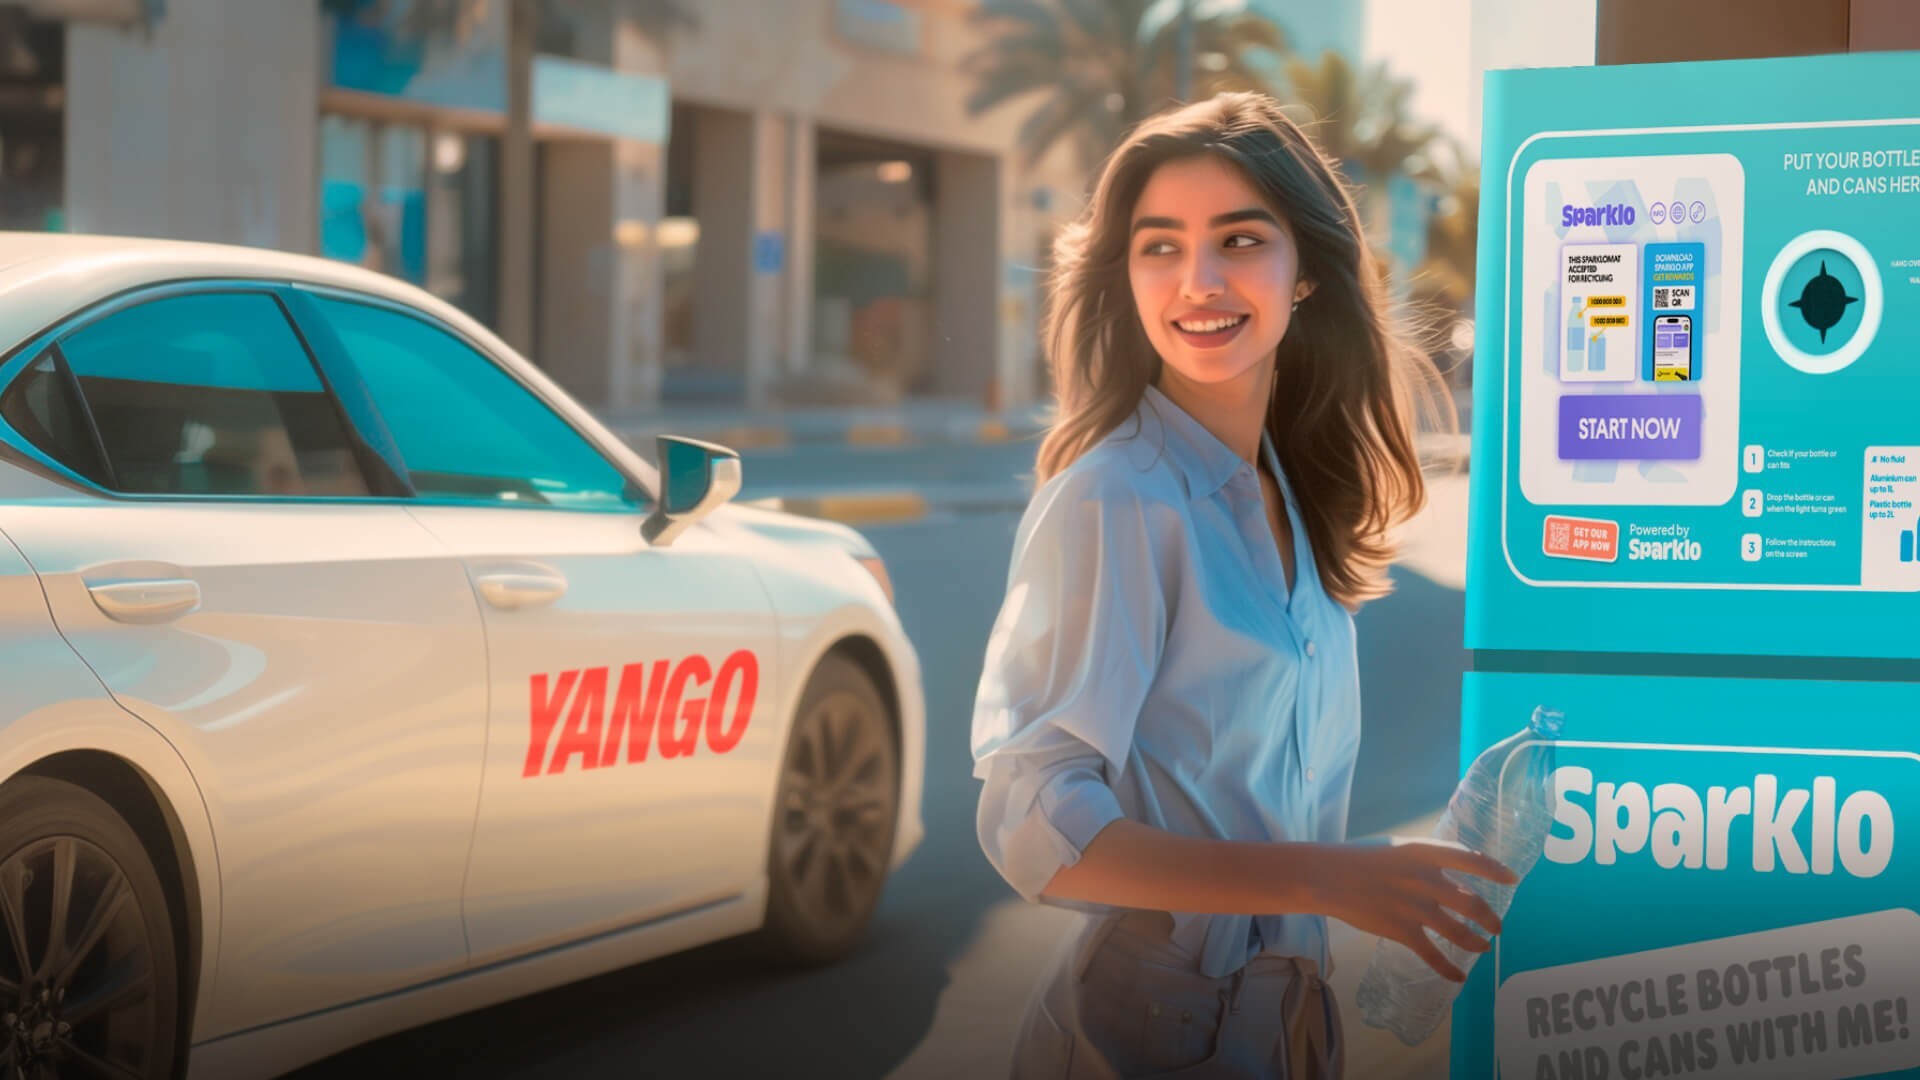 Sparklo & Yango partner to offer ride discounts, supporting UAE's ESG goals through recycling